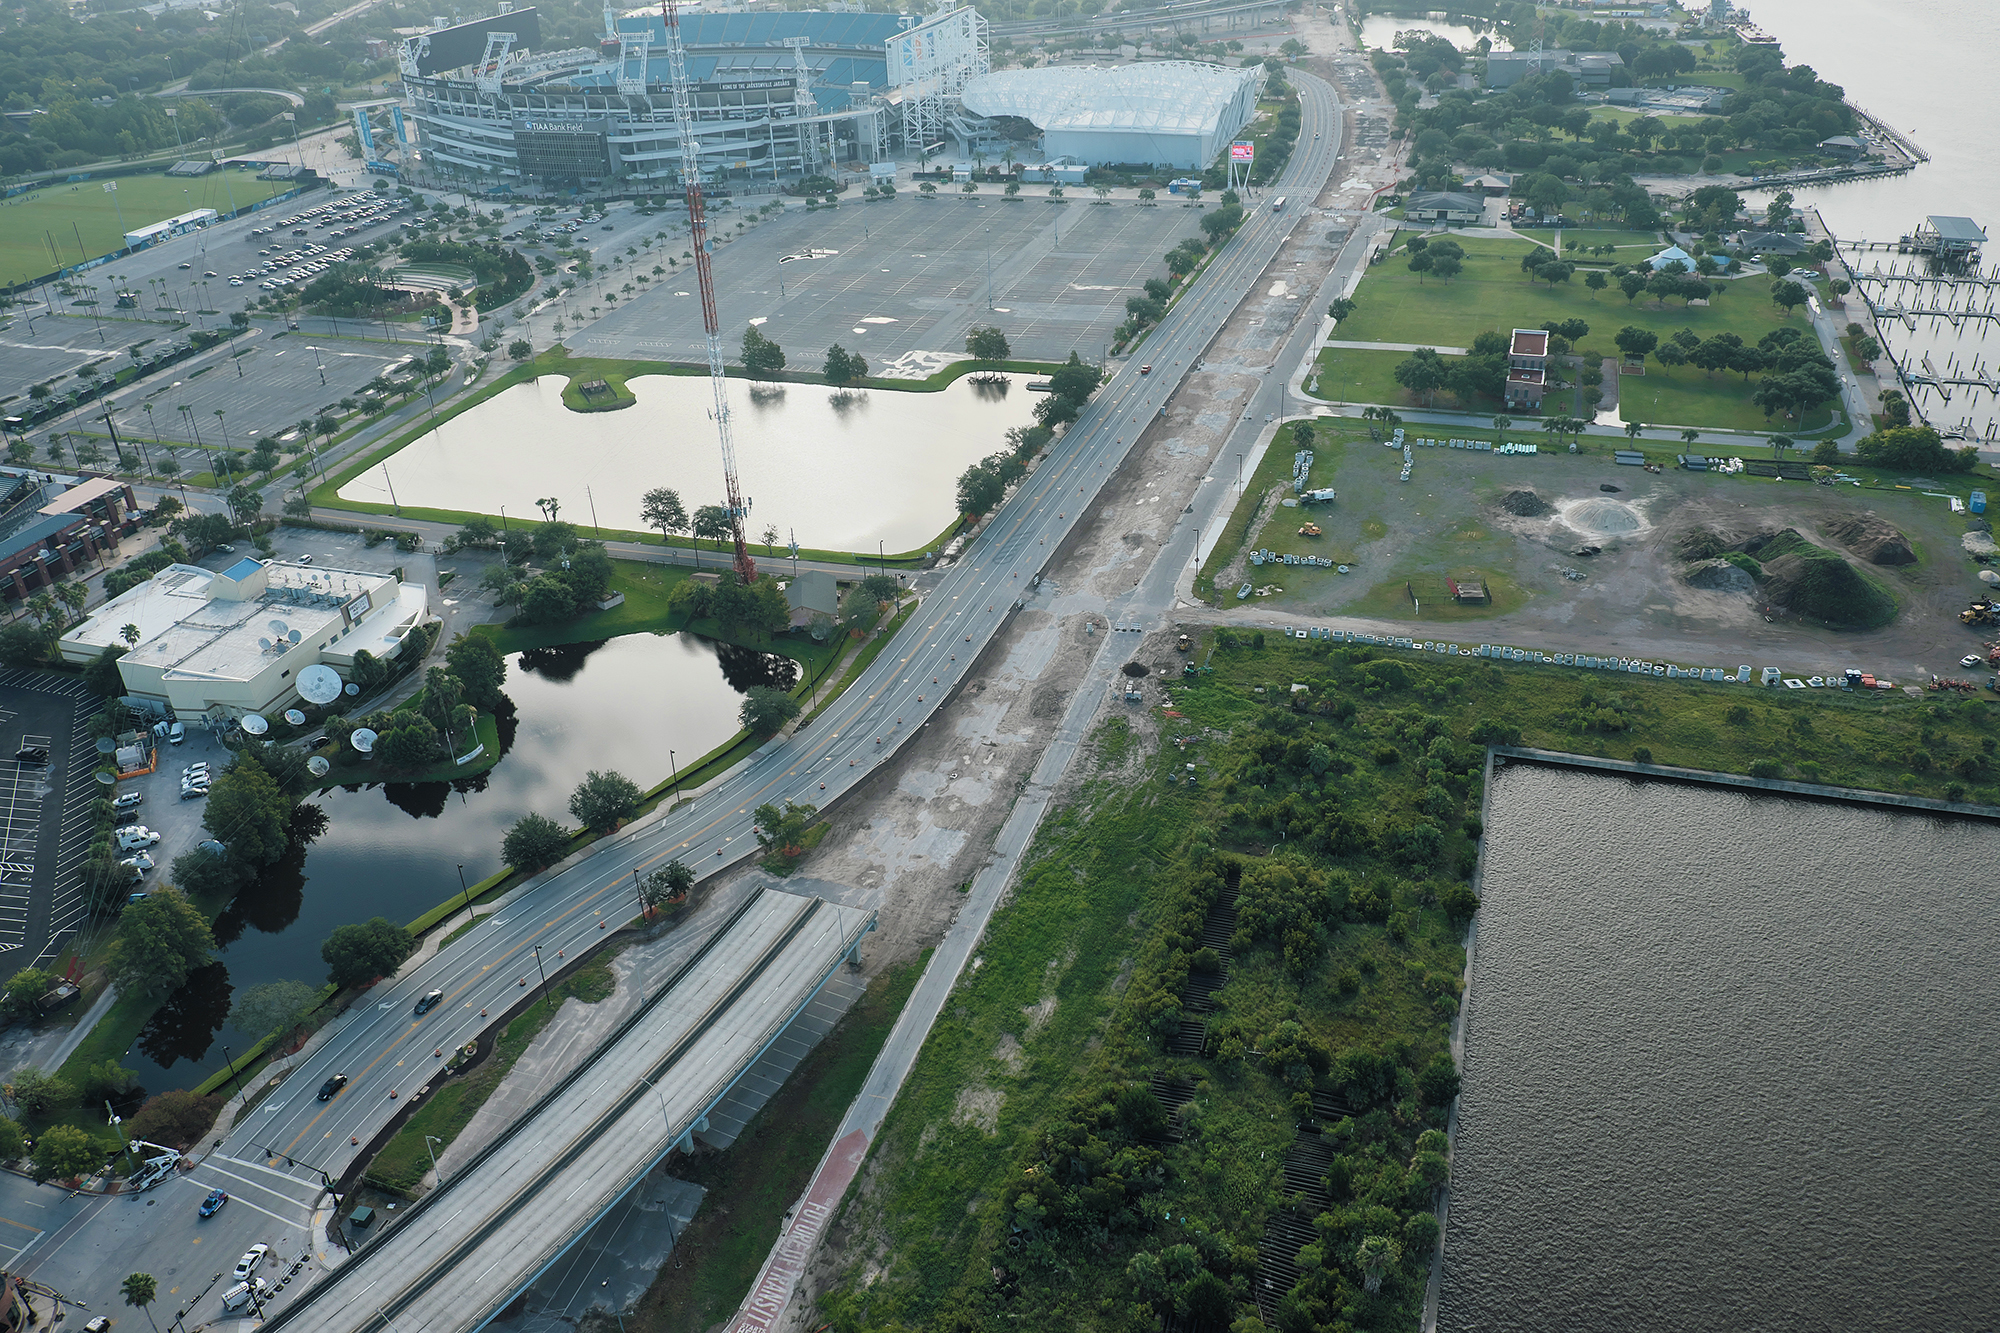 The Downtown Investment Authority and city attorneys are asking the National Park Service to consider swapping Metropolitan Park for a portion of the city-owned Shipyards property.